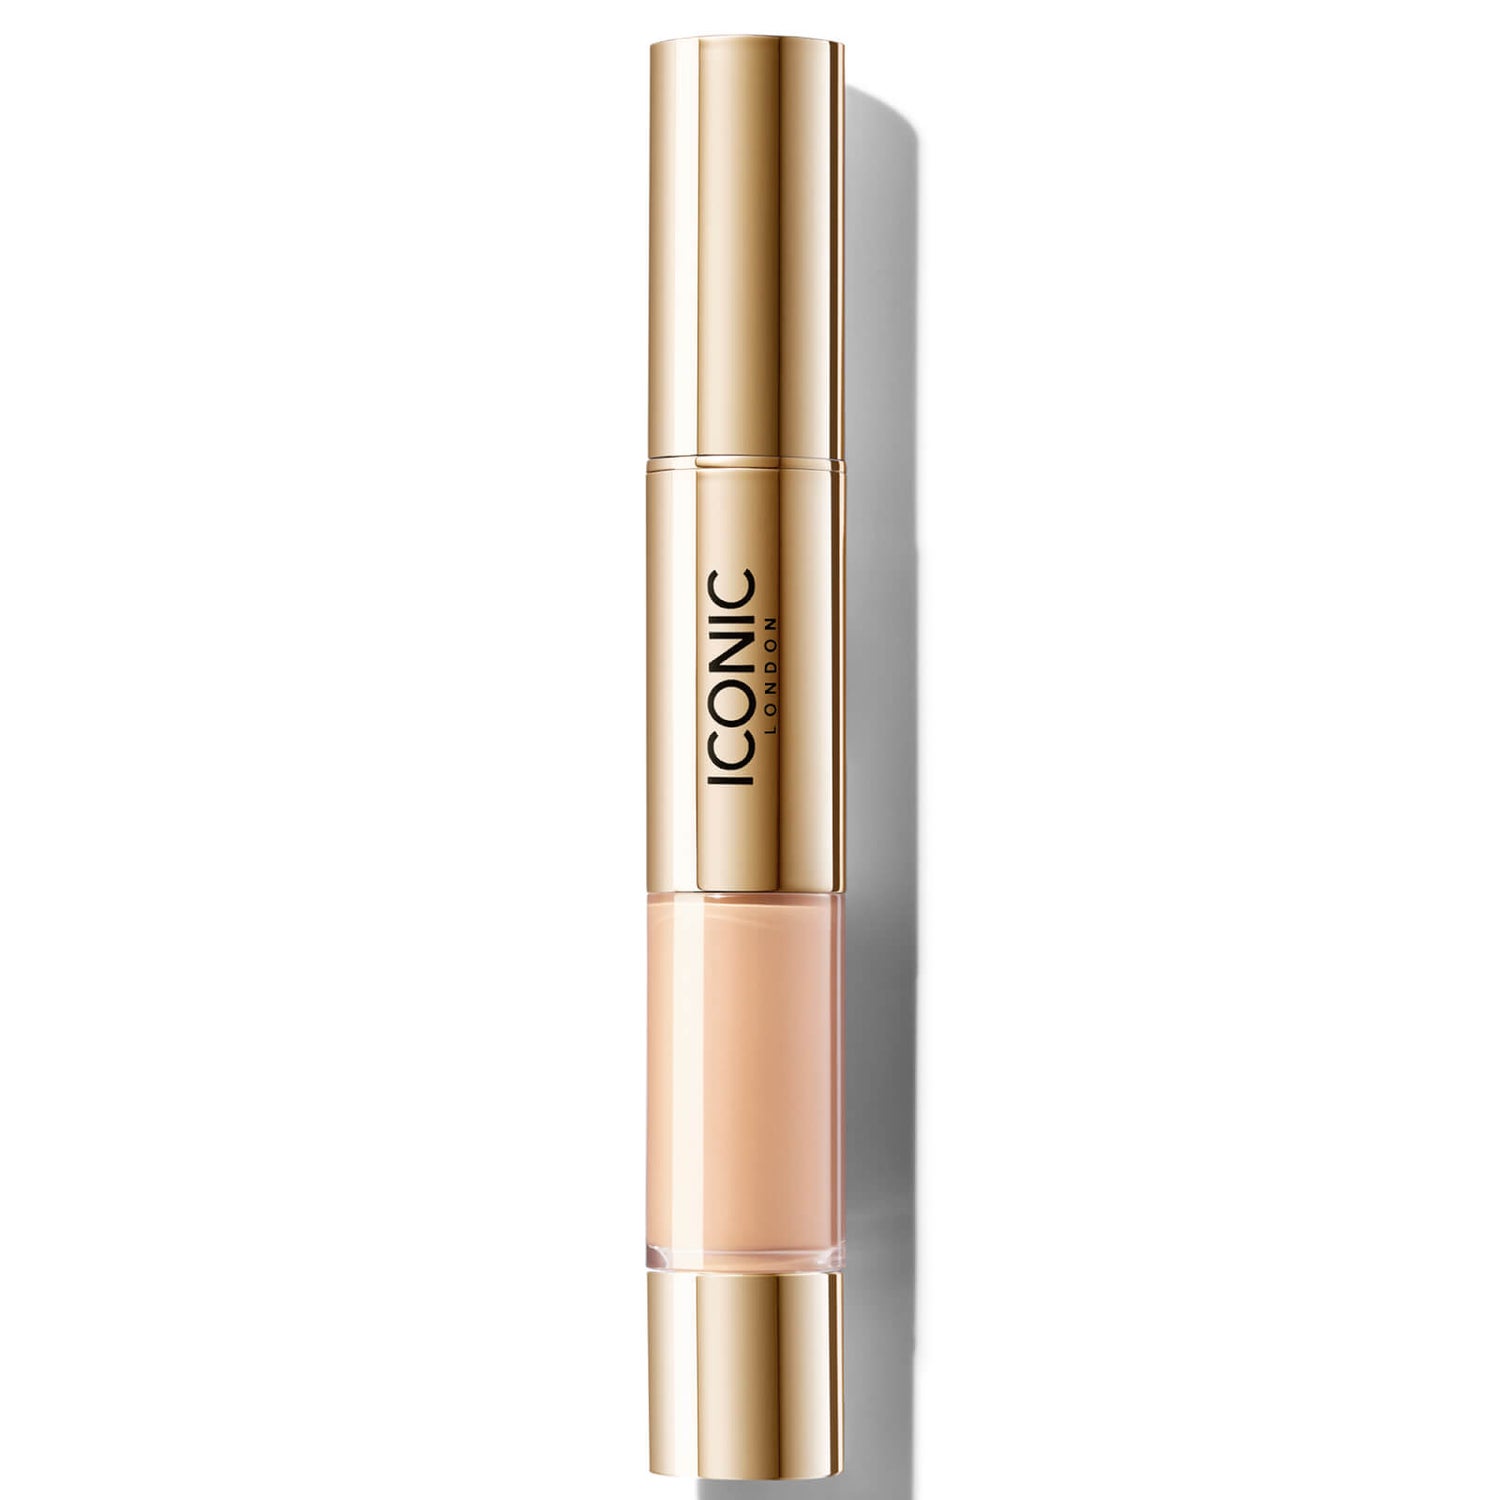 ICONIC London Radiant Concealer and Brightening Duo